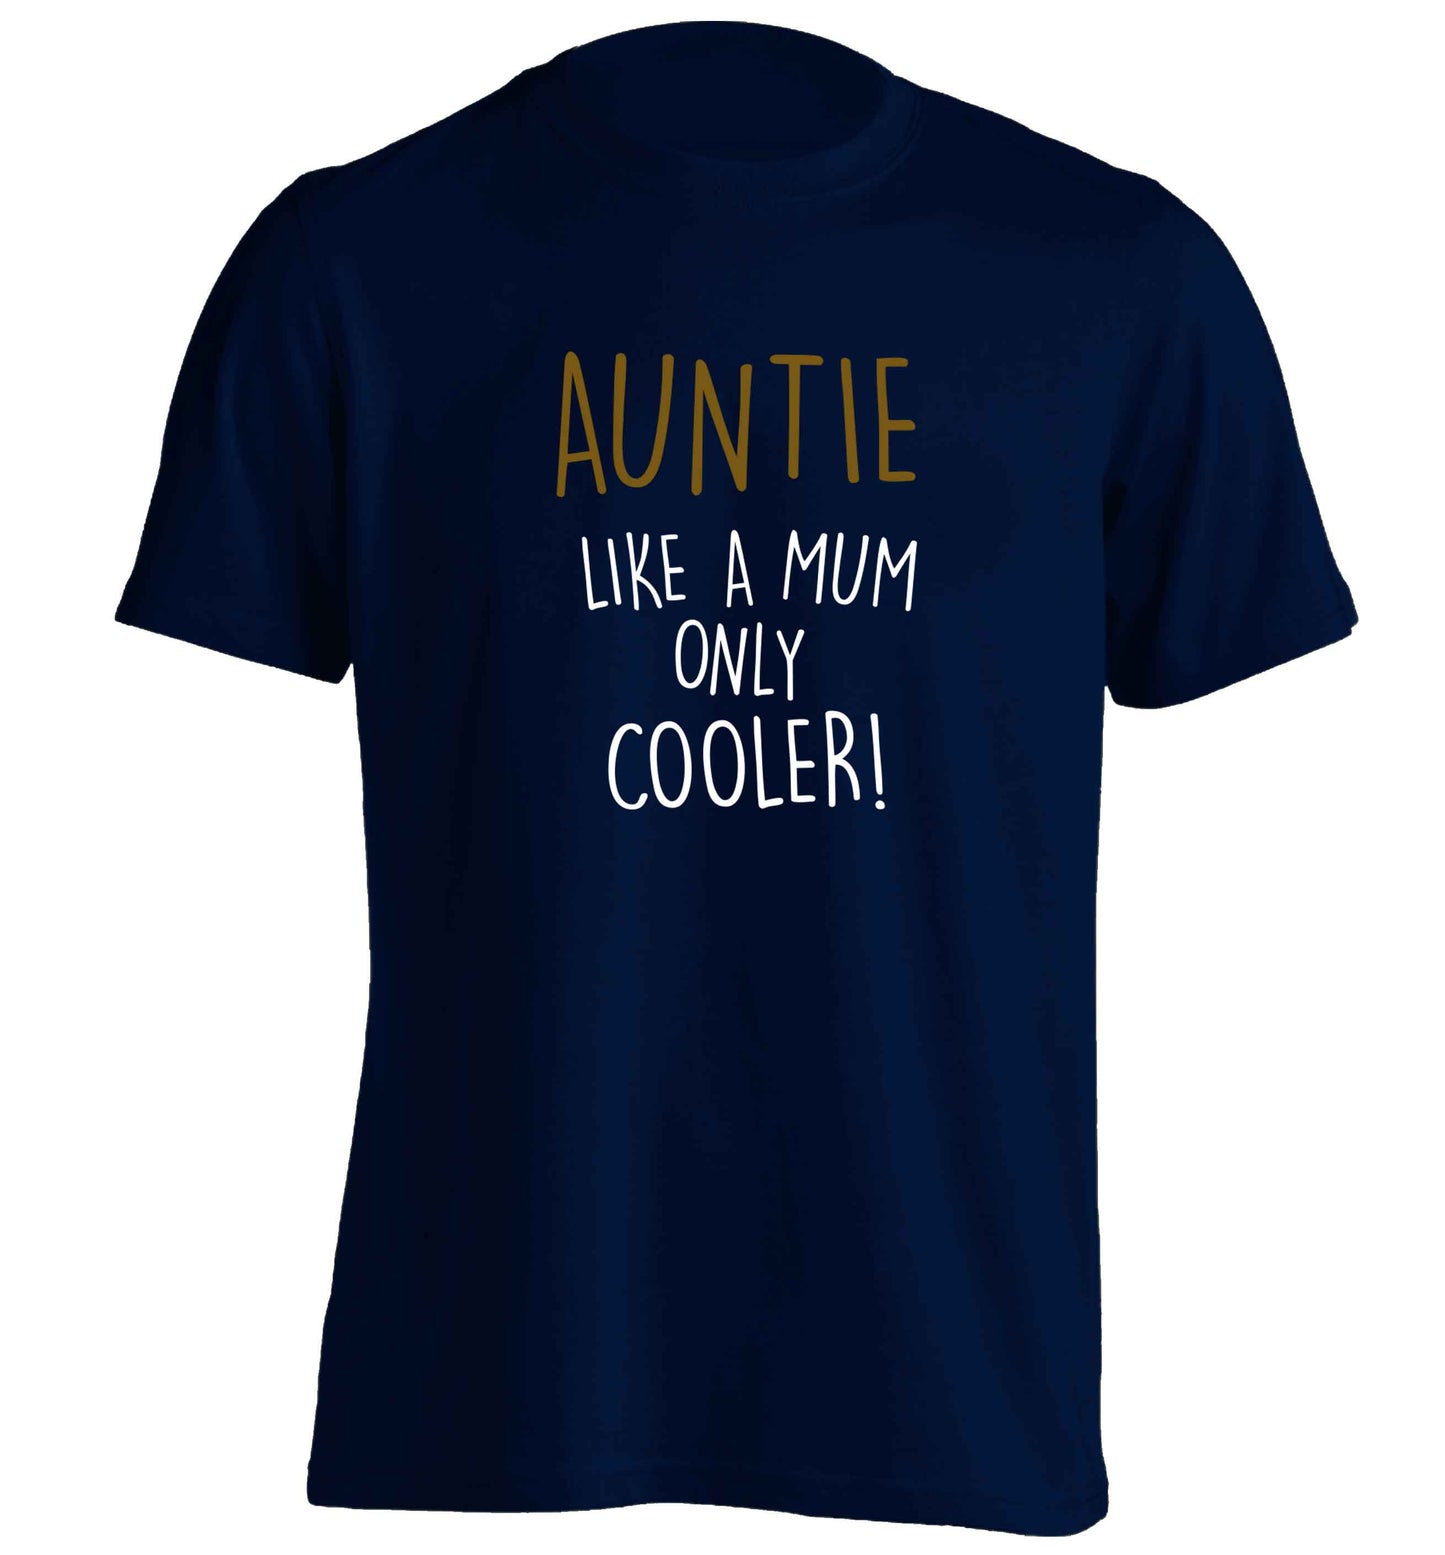 Auntie like a mum only cooler adults unisex navy Tshirt 2XL